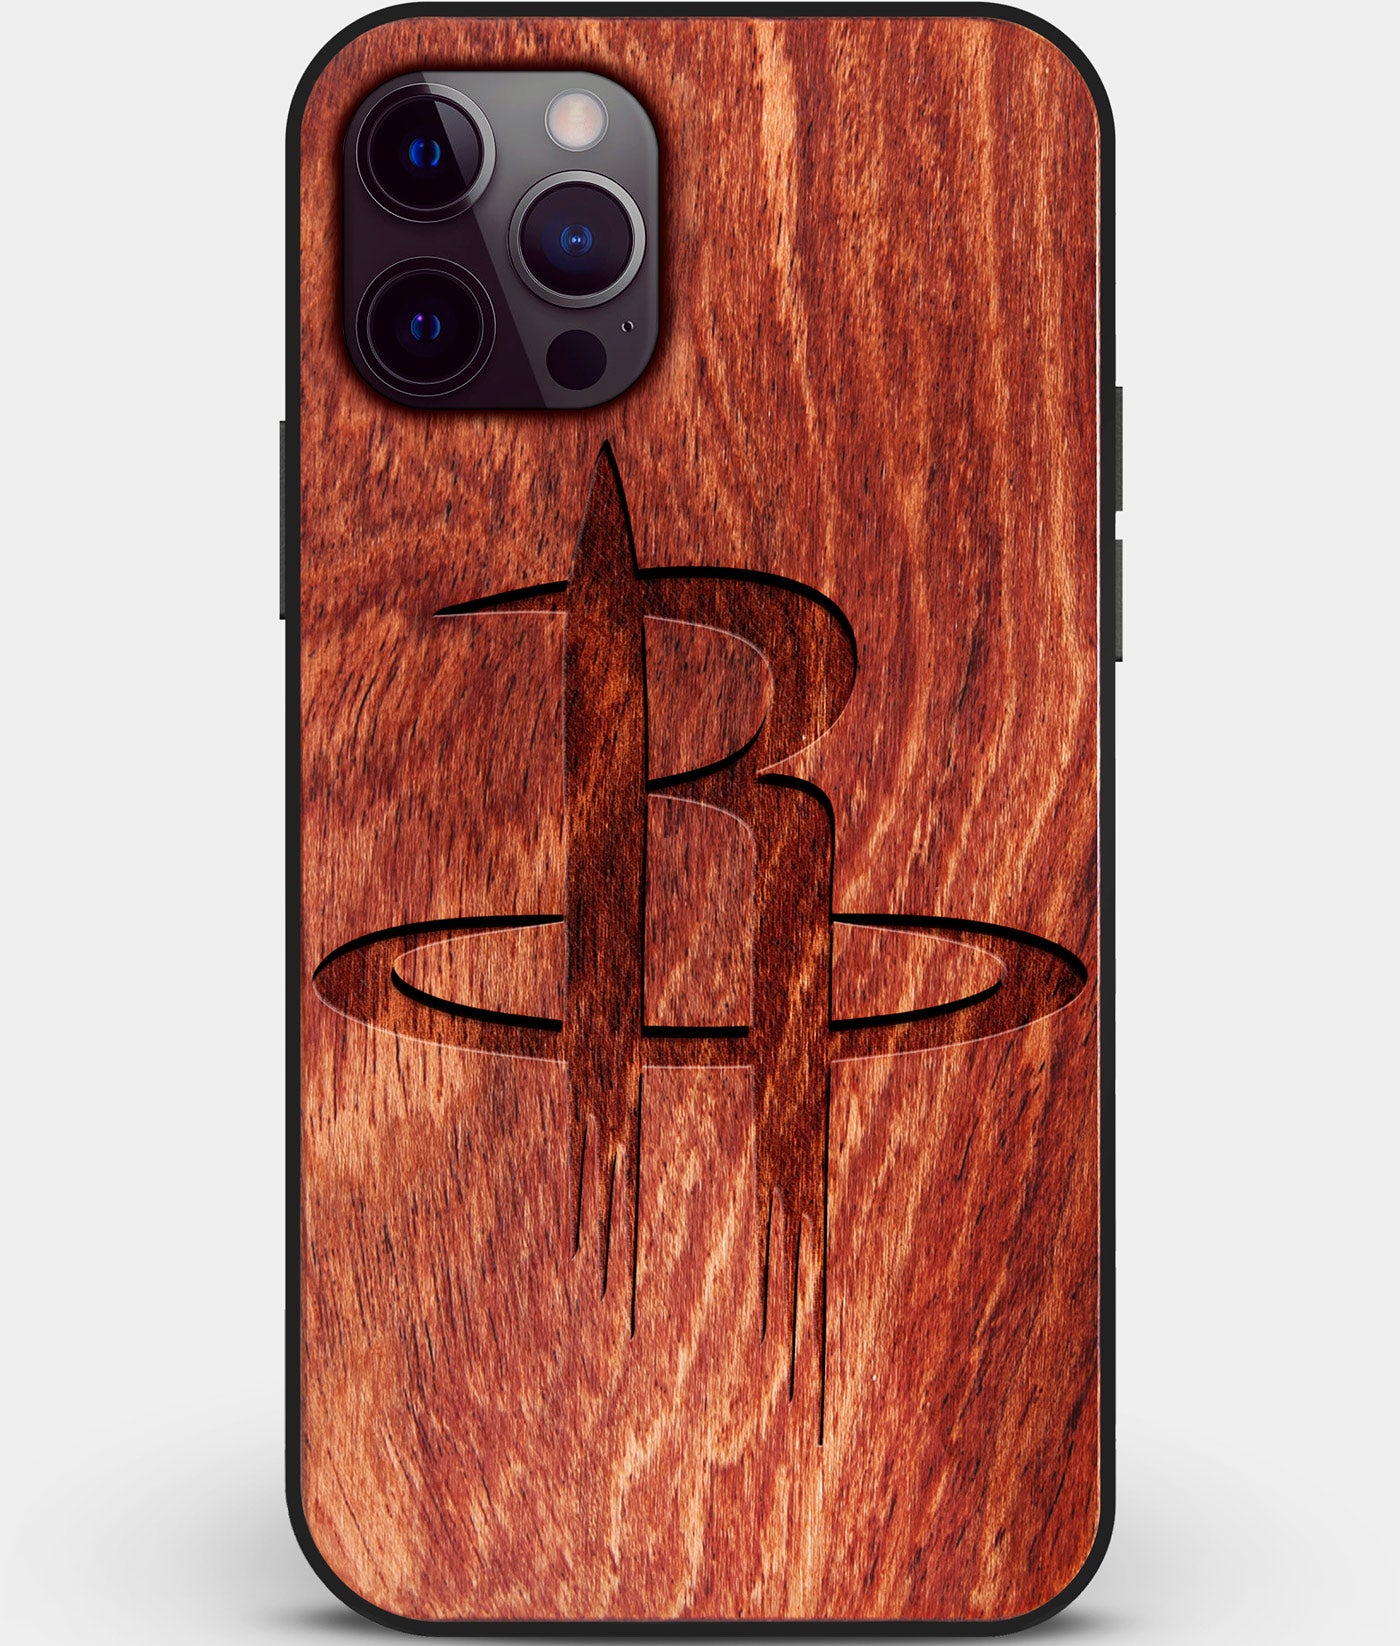 Custom Carved Wood Houston Rockets iPhone 12 Pro Case | Personalized Mahogany Wood Houston Rockets Cover, Birthday Gift, Gifts For Him, Monogrammed Gift For Fan | by Engraved In Nature